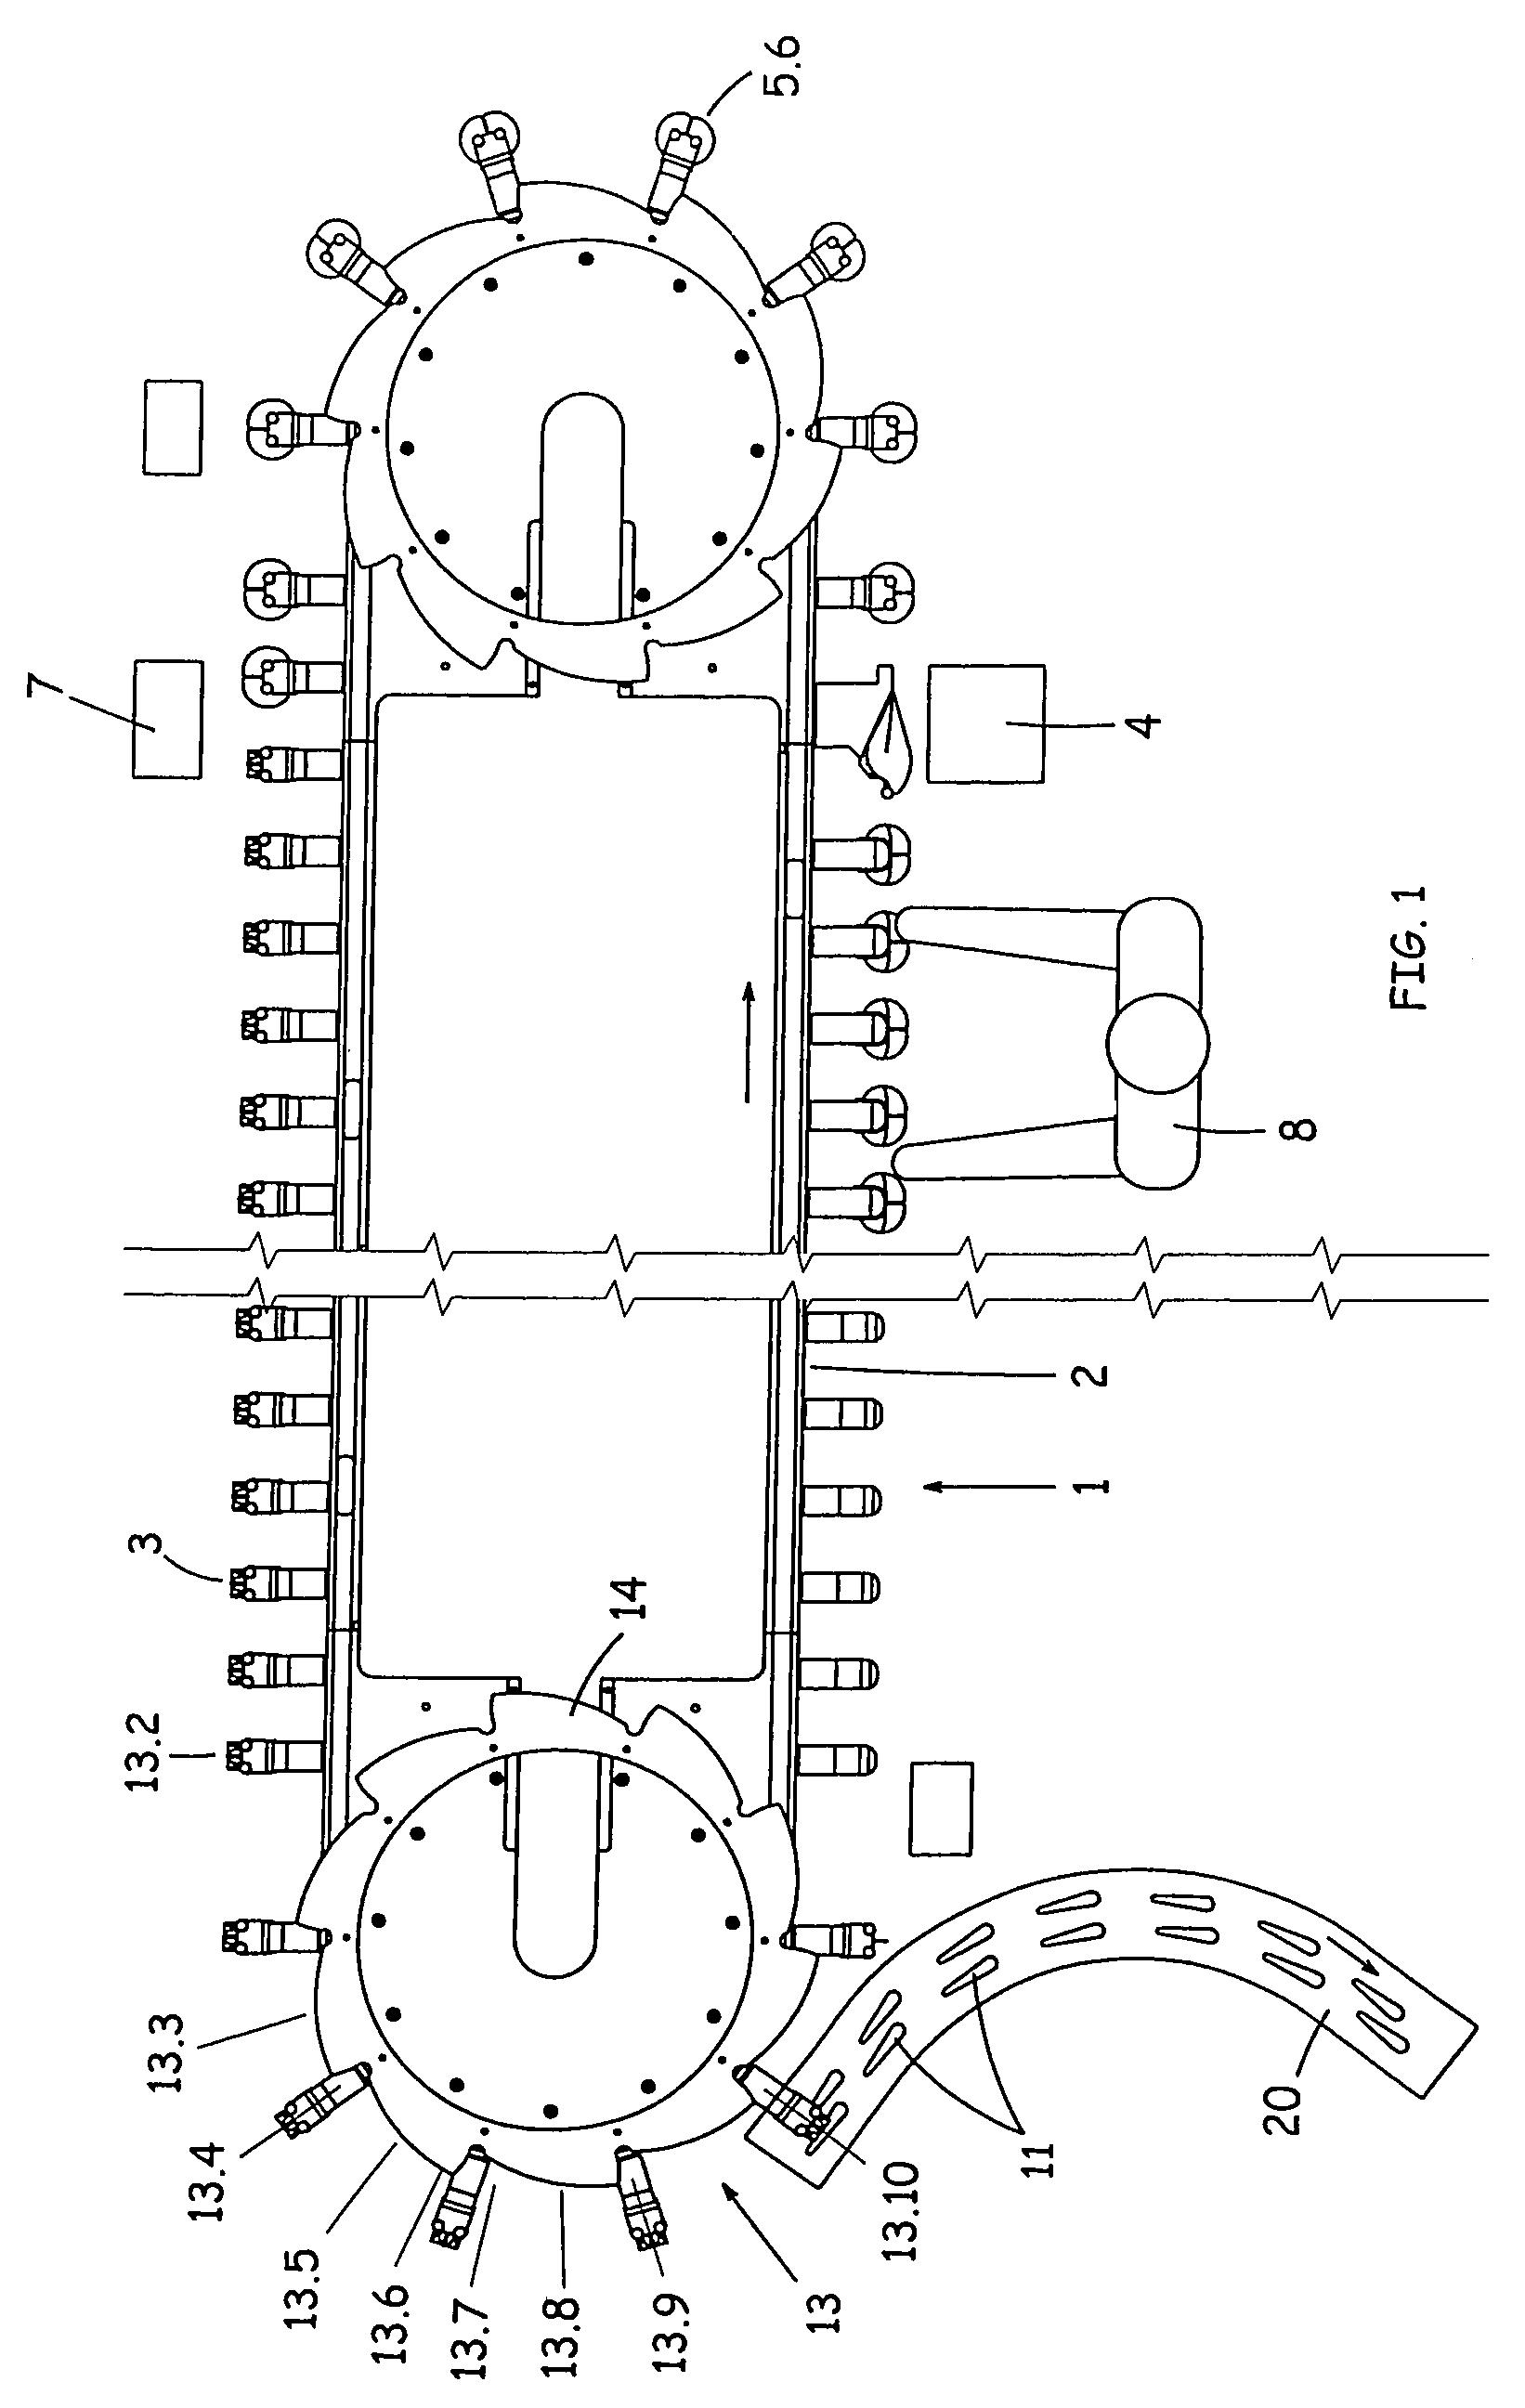 Method and apparatus for harvesting an inner fillet from poultry